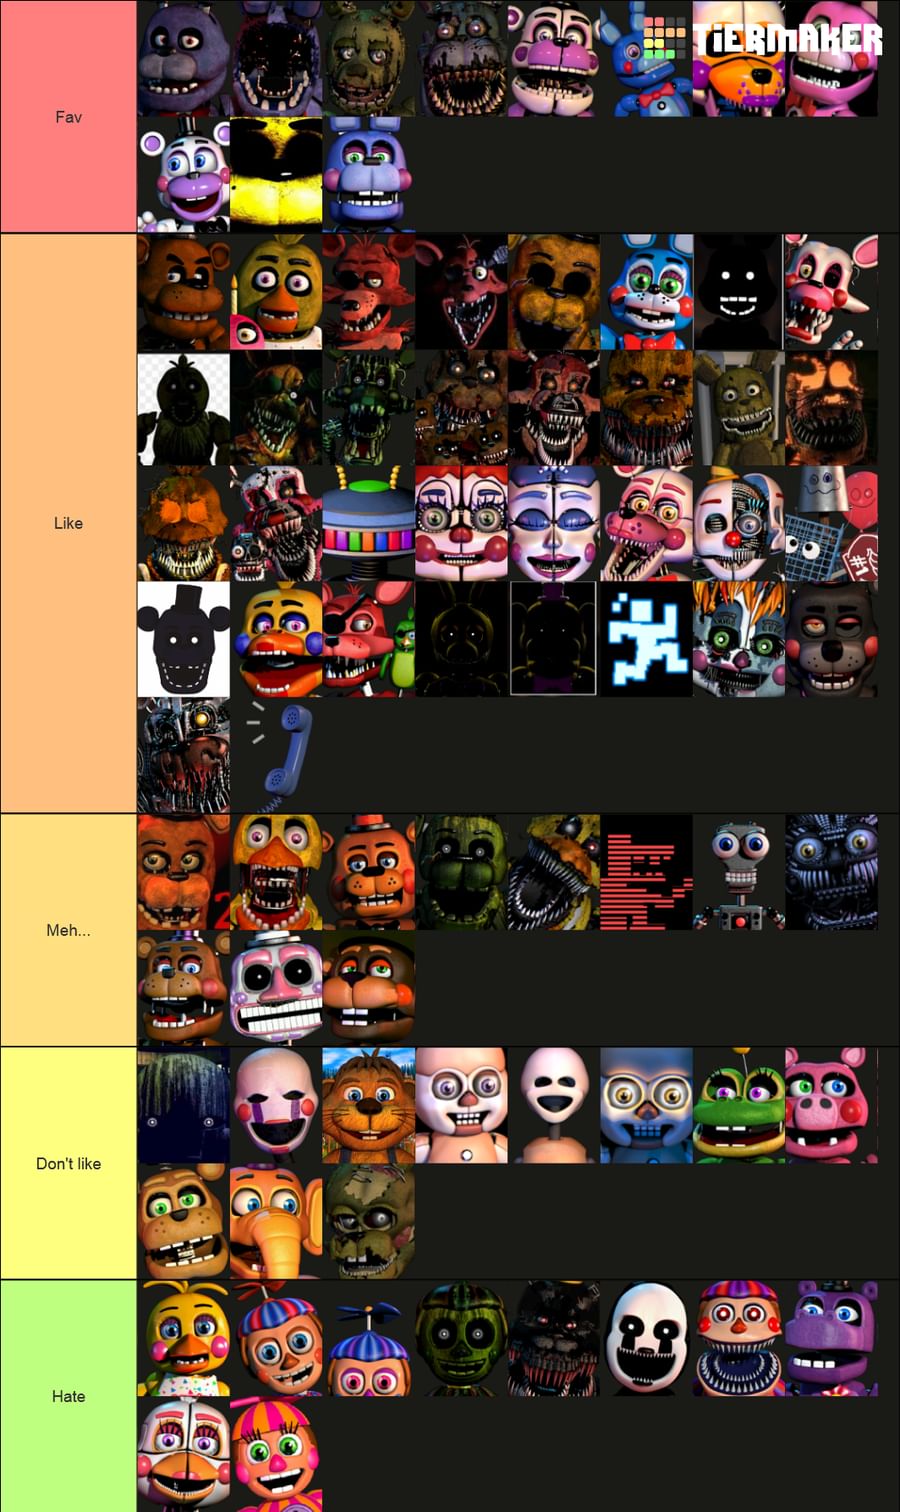 New Posts In General Five Nights At Freddy S Community On Game Jolt